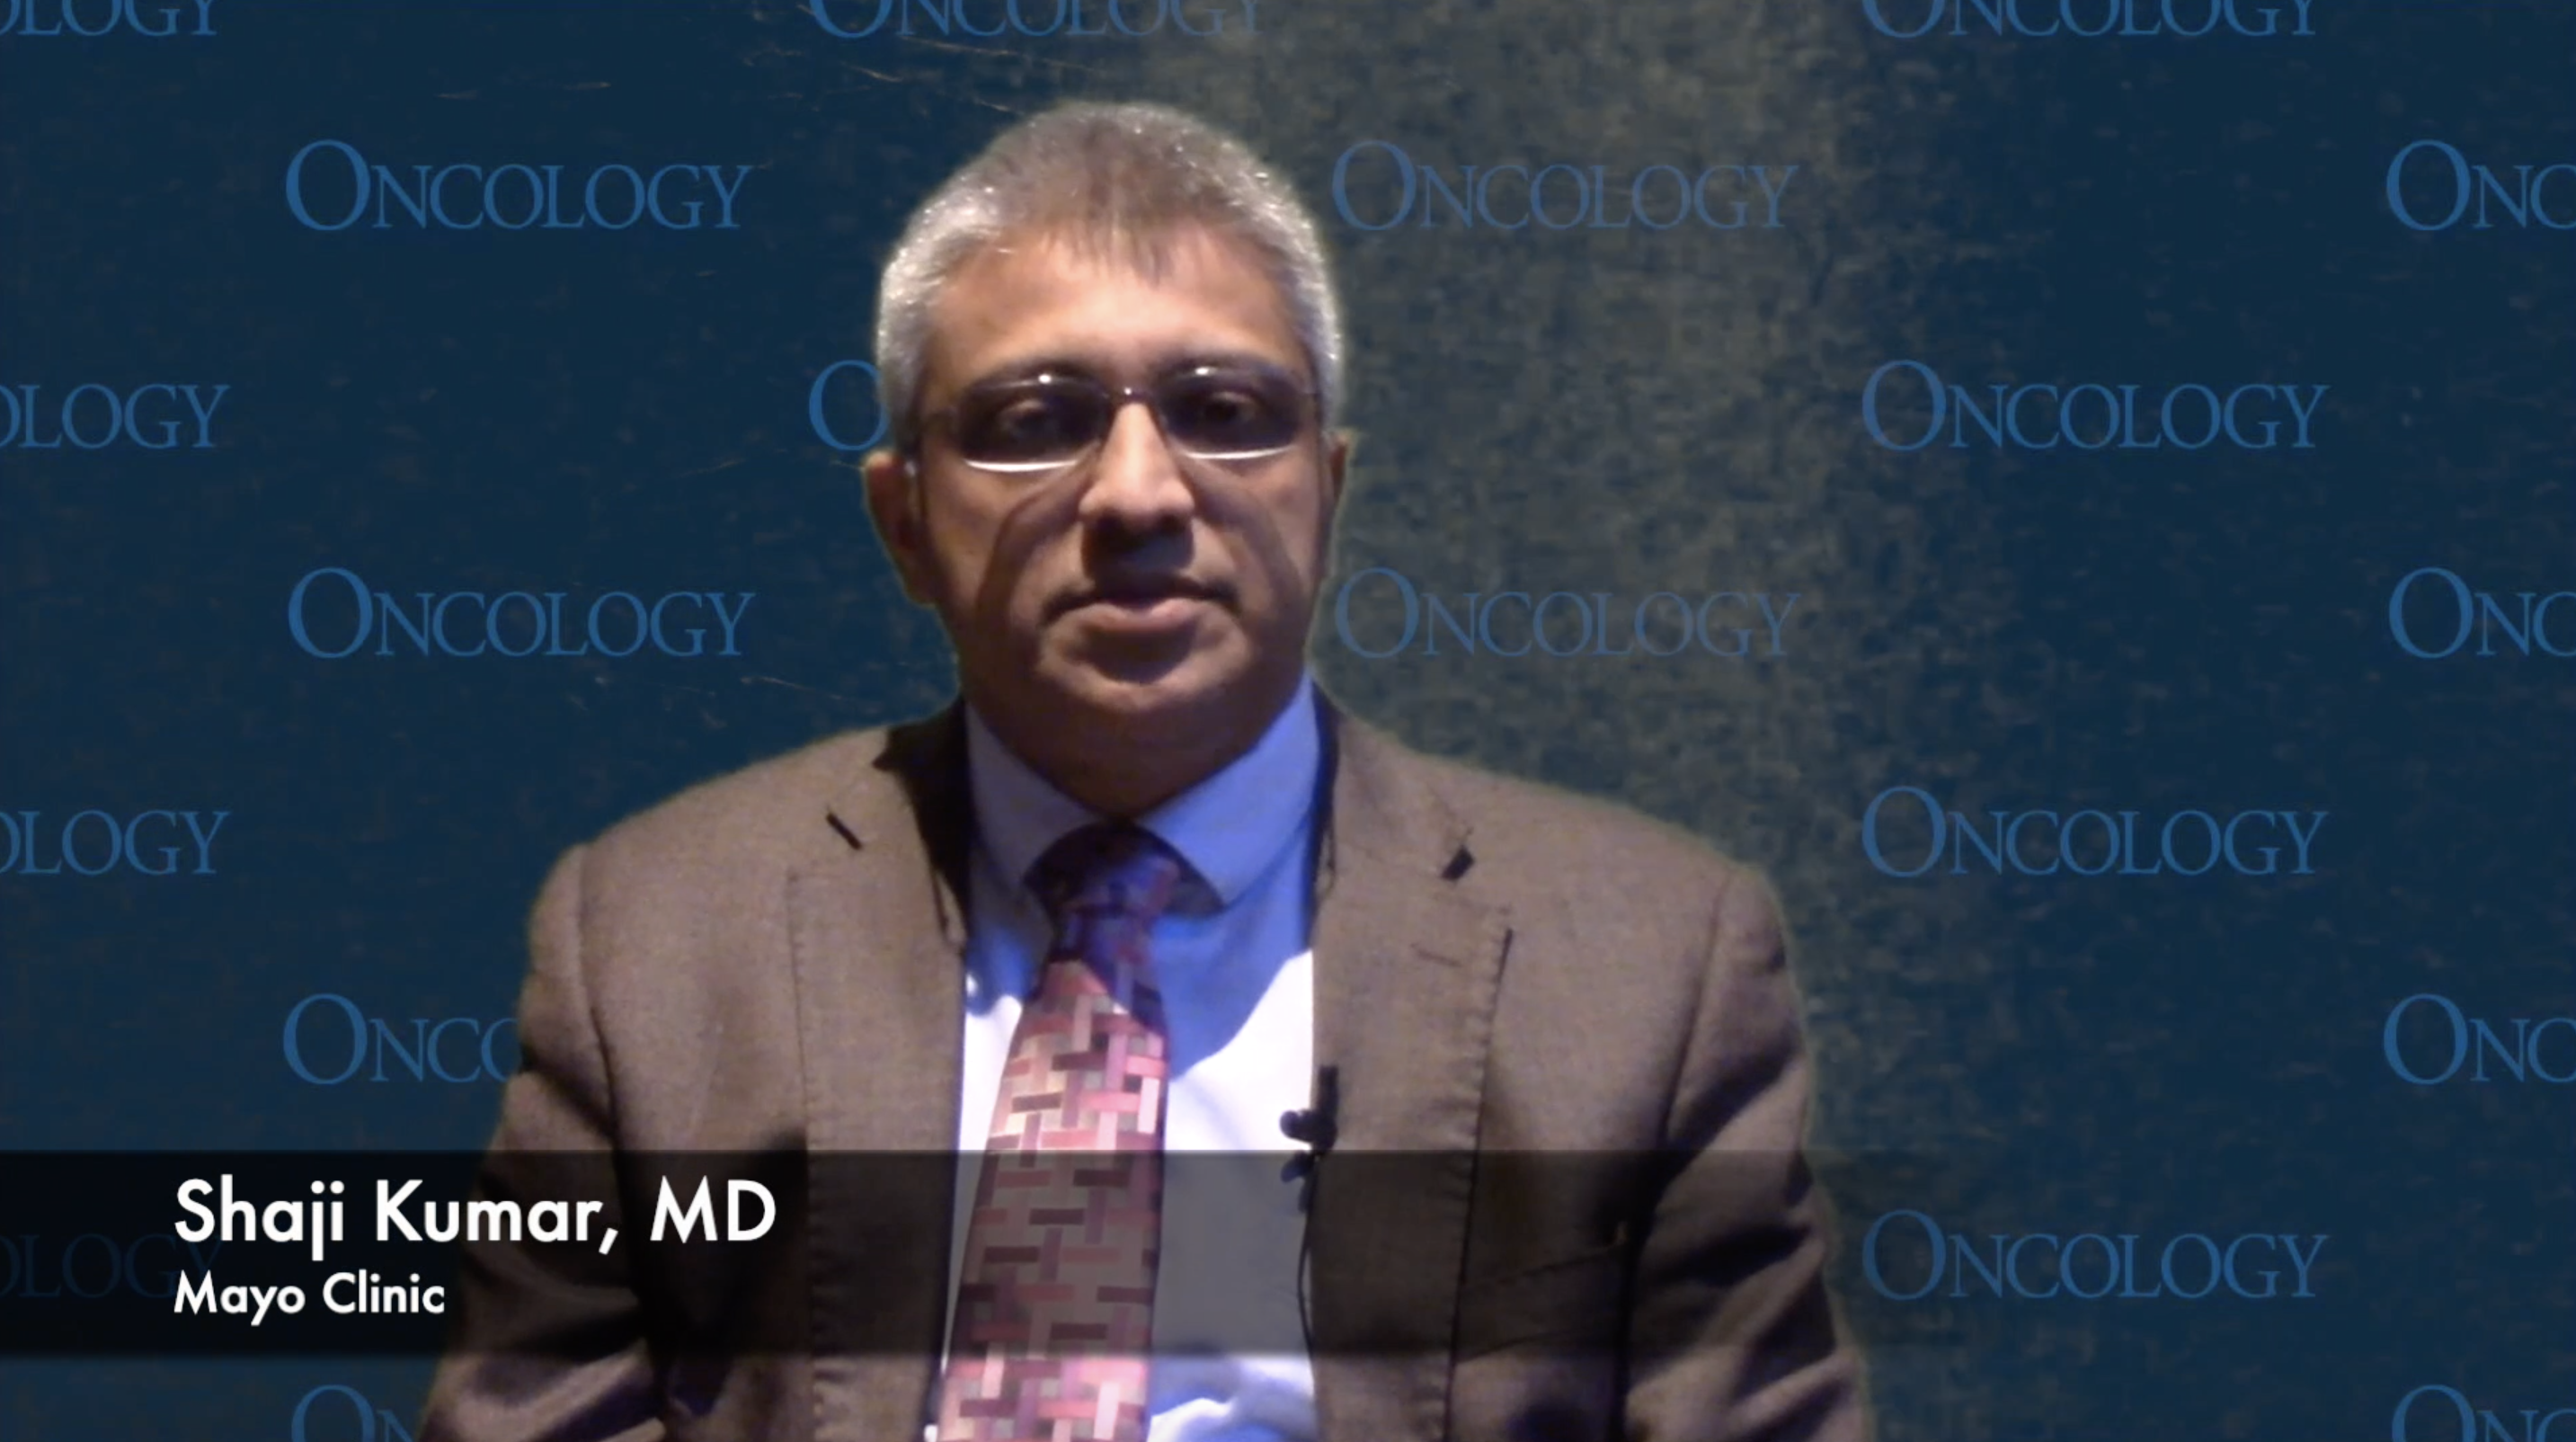 Shaji Kumar, MD, on Stem Cell Transplantation for Patients with Myeloma